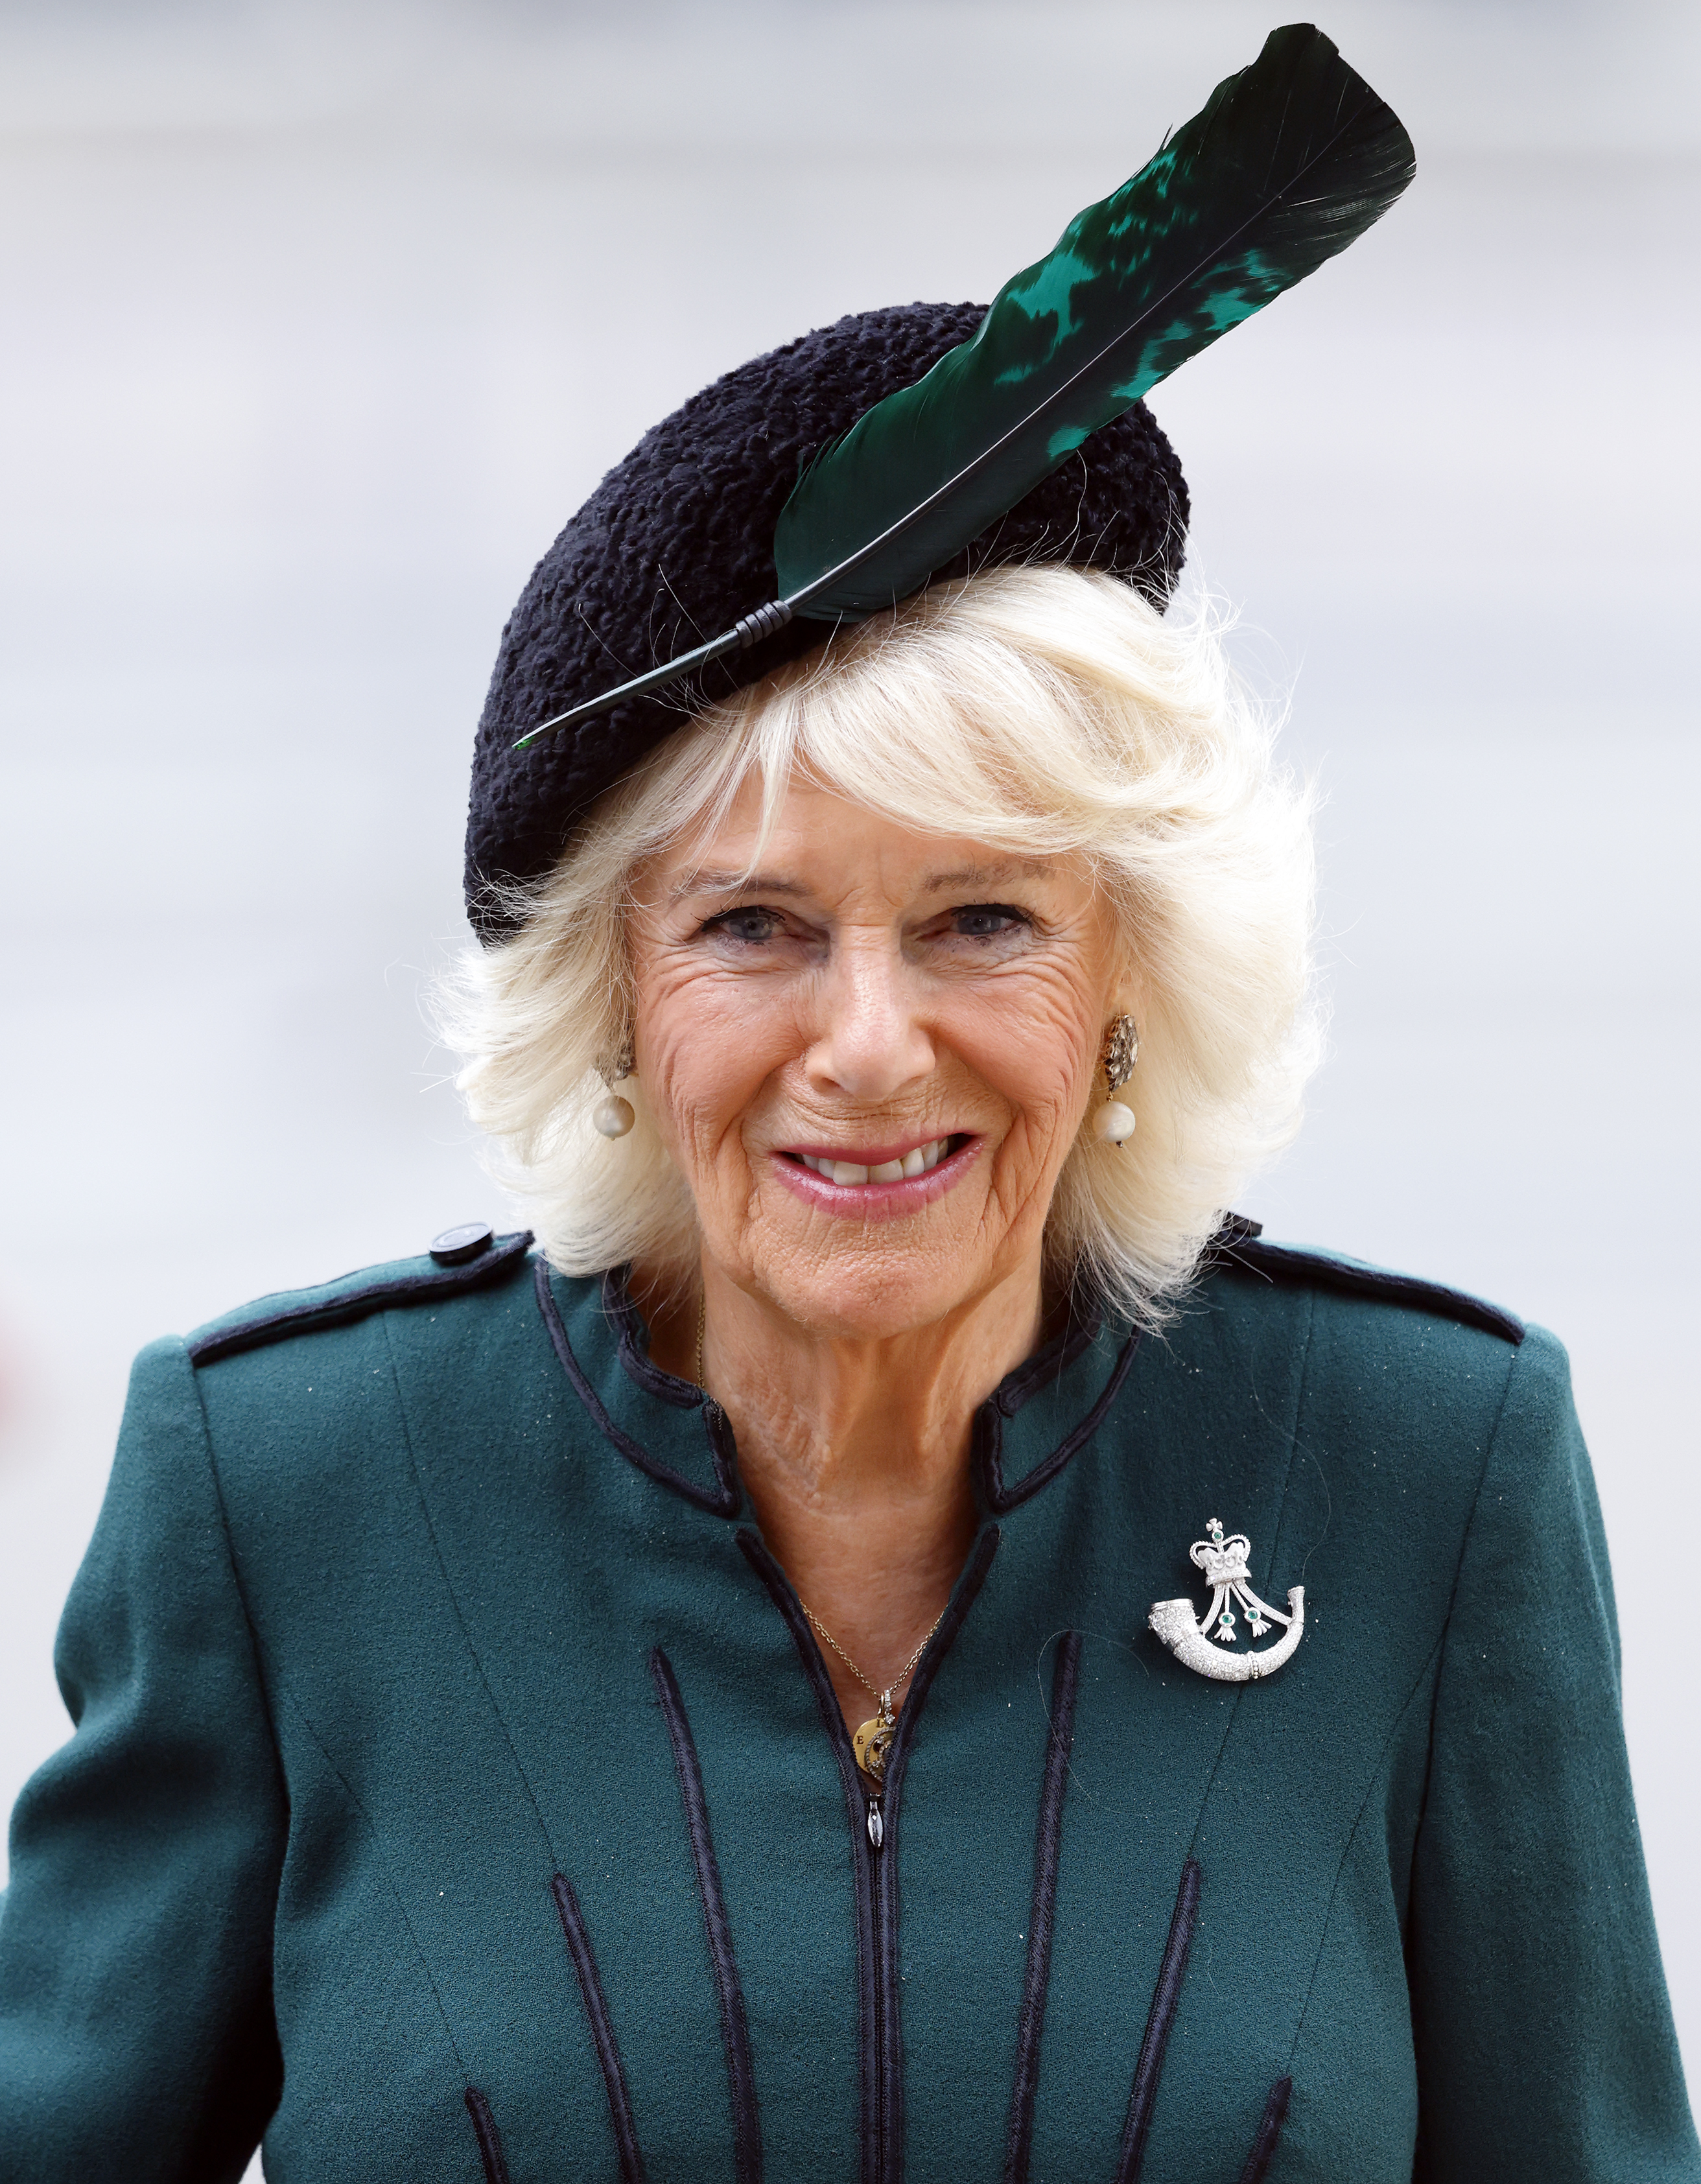 Camilla, Duchess of Cornwall attends a Service of Thanksgiving for the life of Prince Philip, Duke of Edinburgh in London, England, on March 29, 2022. | Source: Getty Images